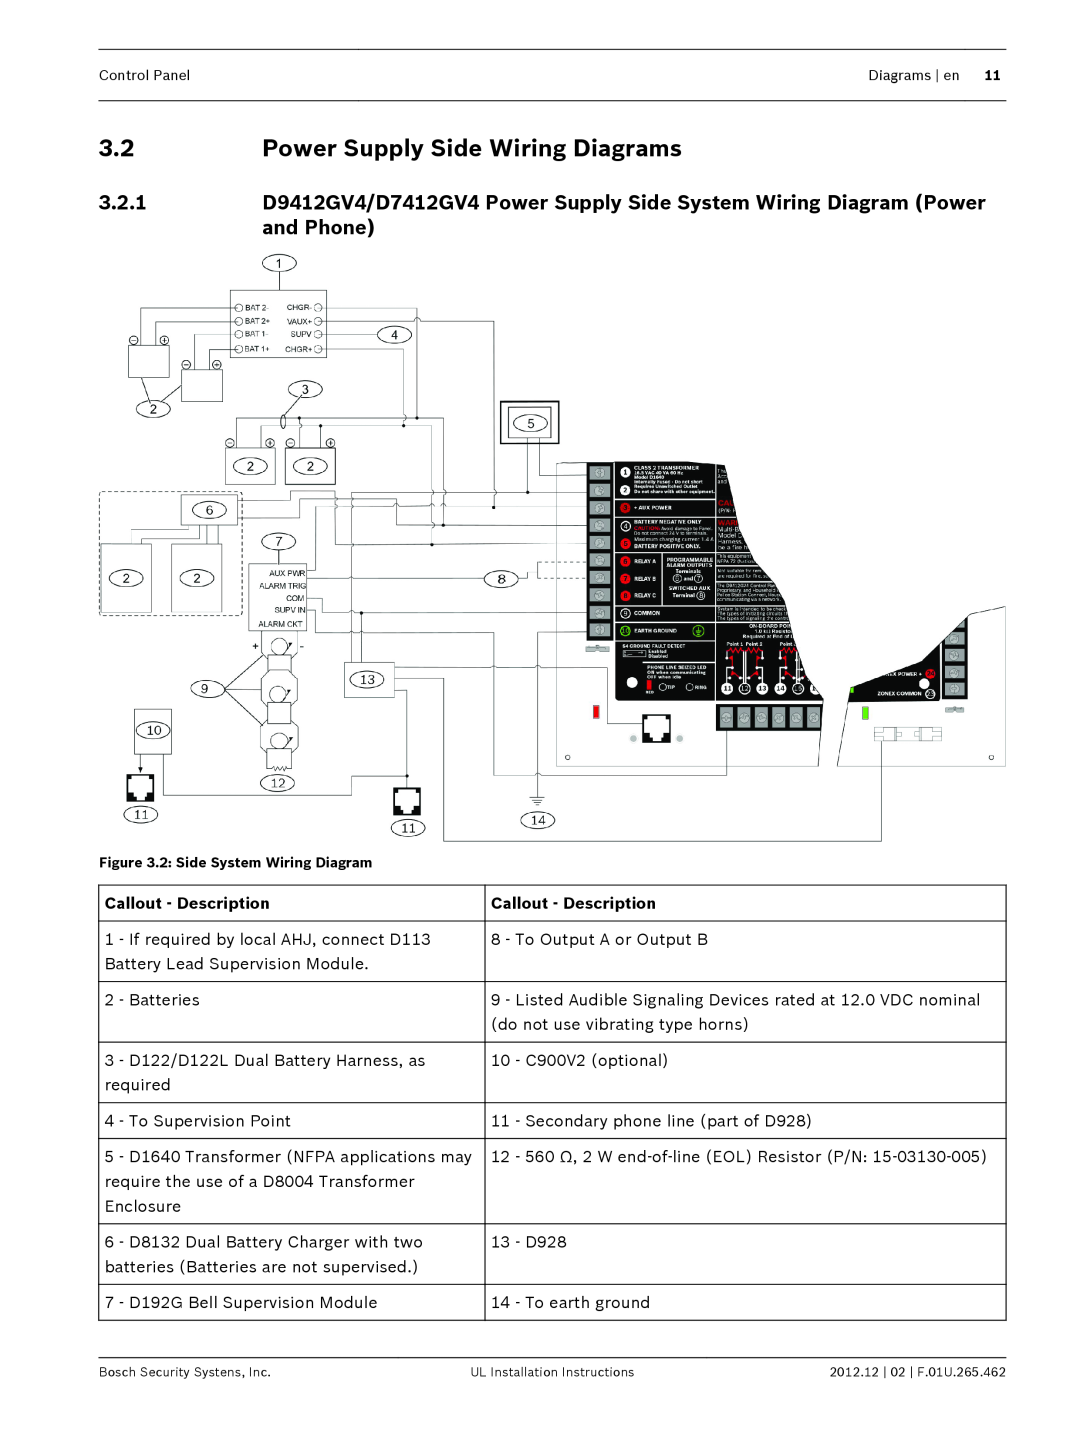 Bosch Appliances D9412GV4 installation instructions Power Supply Side Wiring Diagrams, 3.2.1, and Phone 